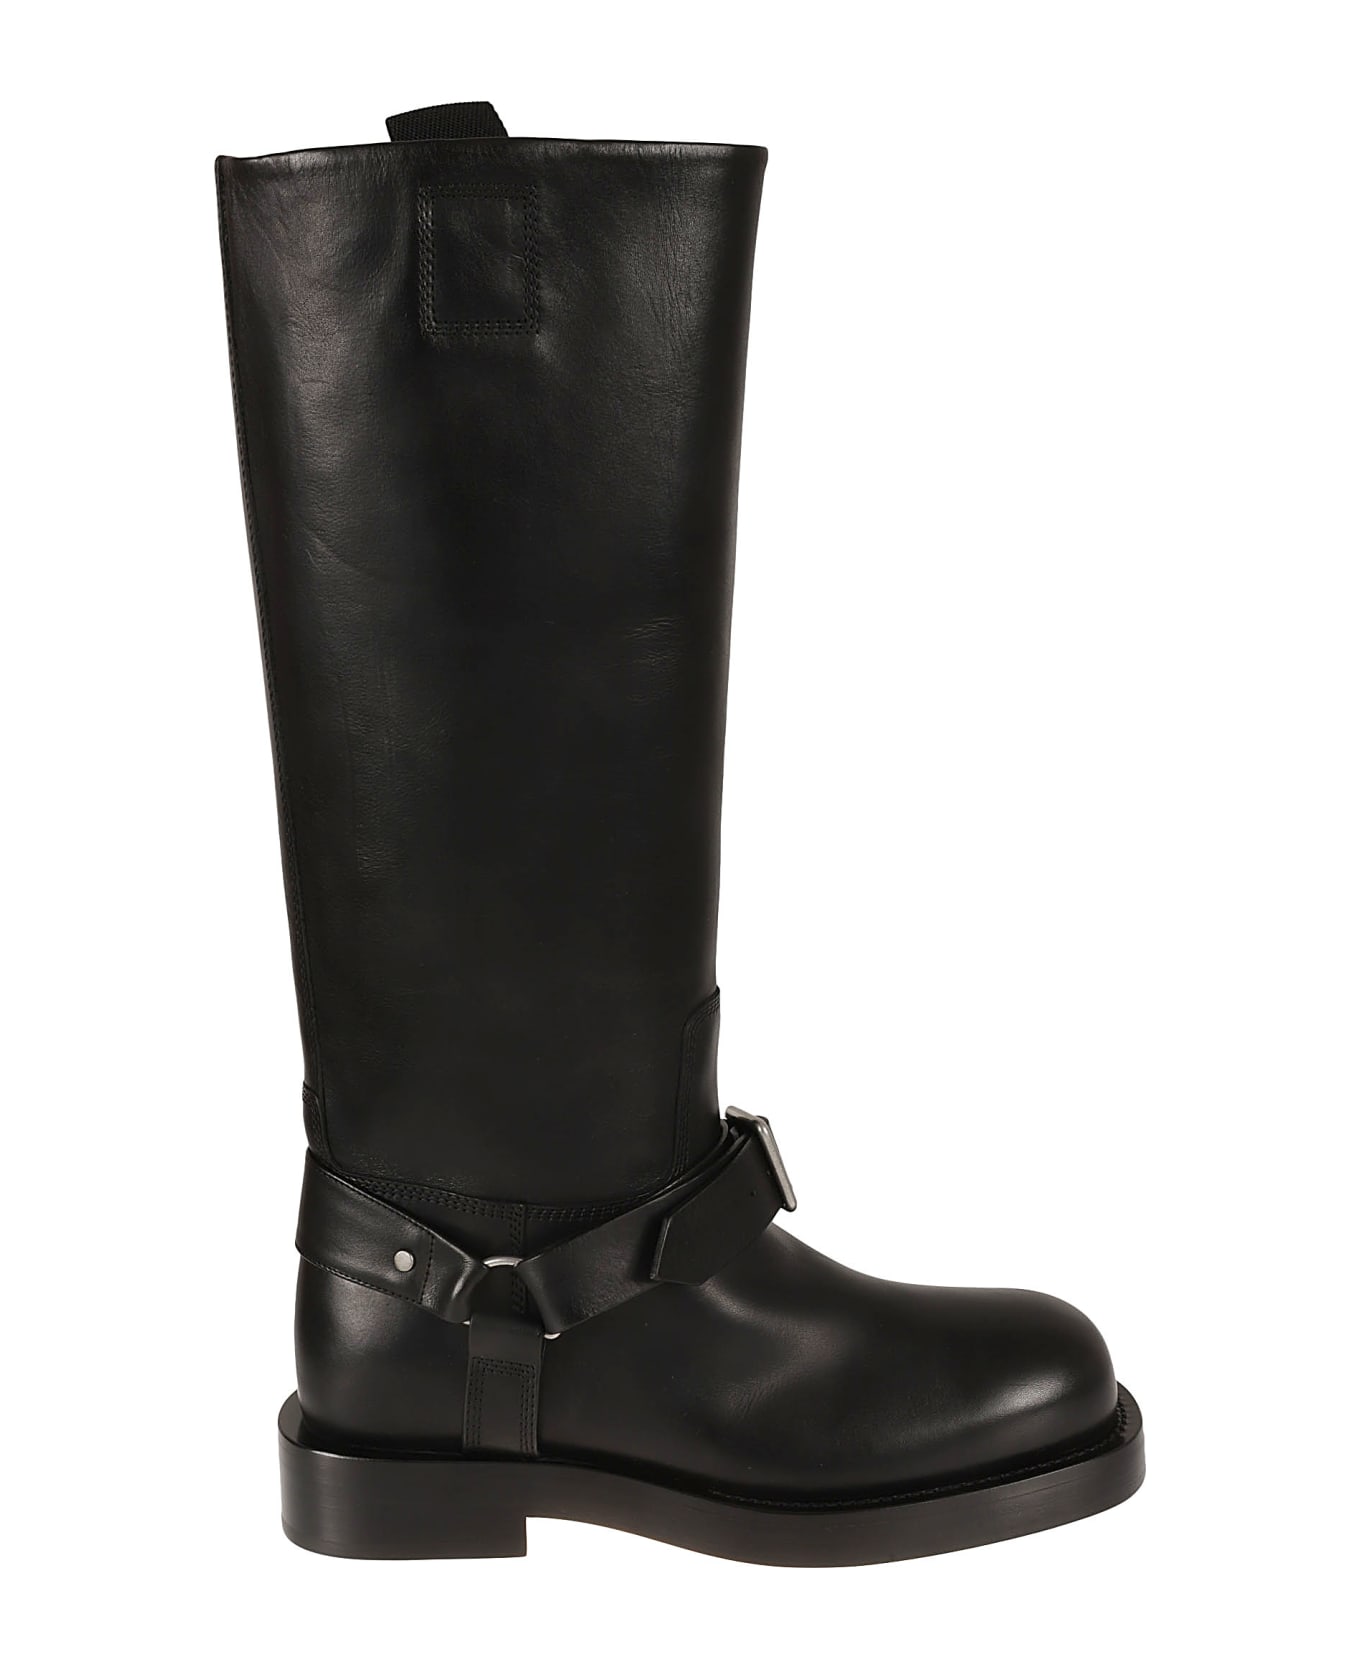 Burberry Ankle Buckle Strap Boots - Black